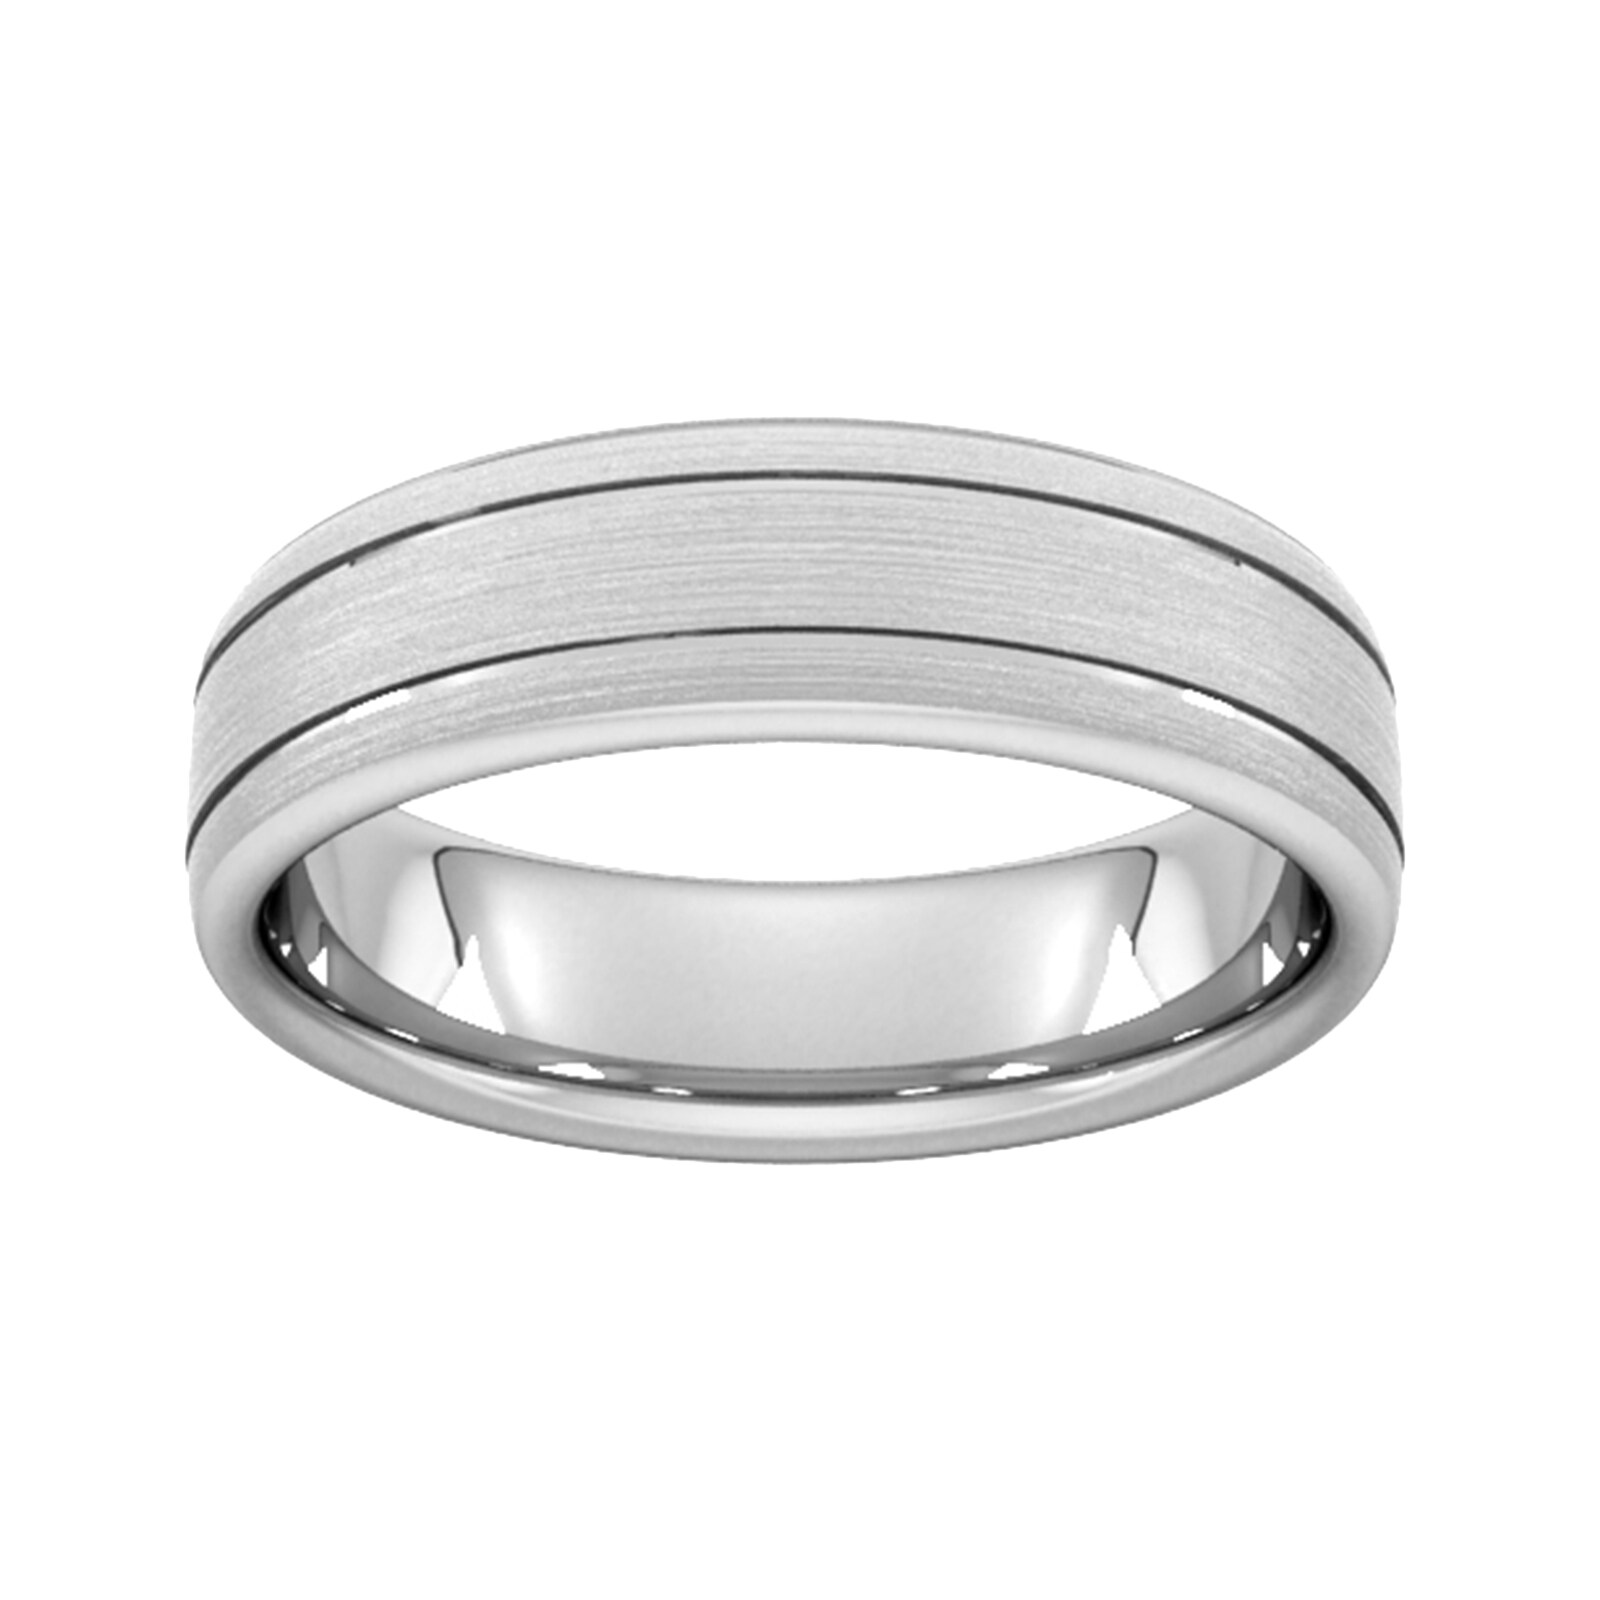 6mm D Shape Heavy Matt Finish With Double Grooves Wedding Ring In 18 Carat White Gold - Ring Size K